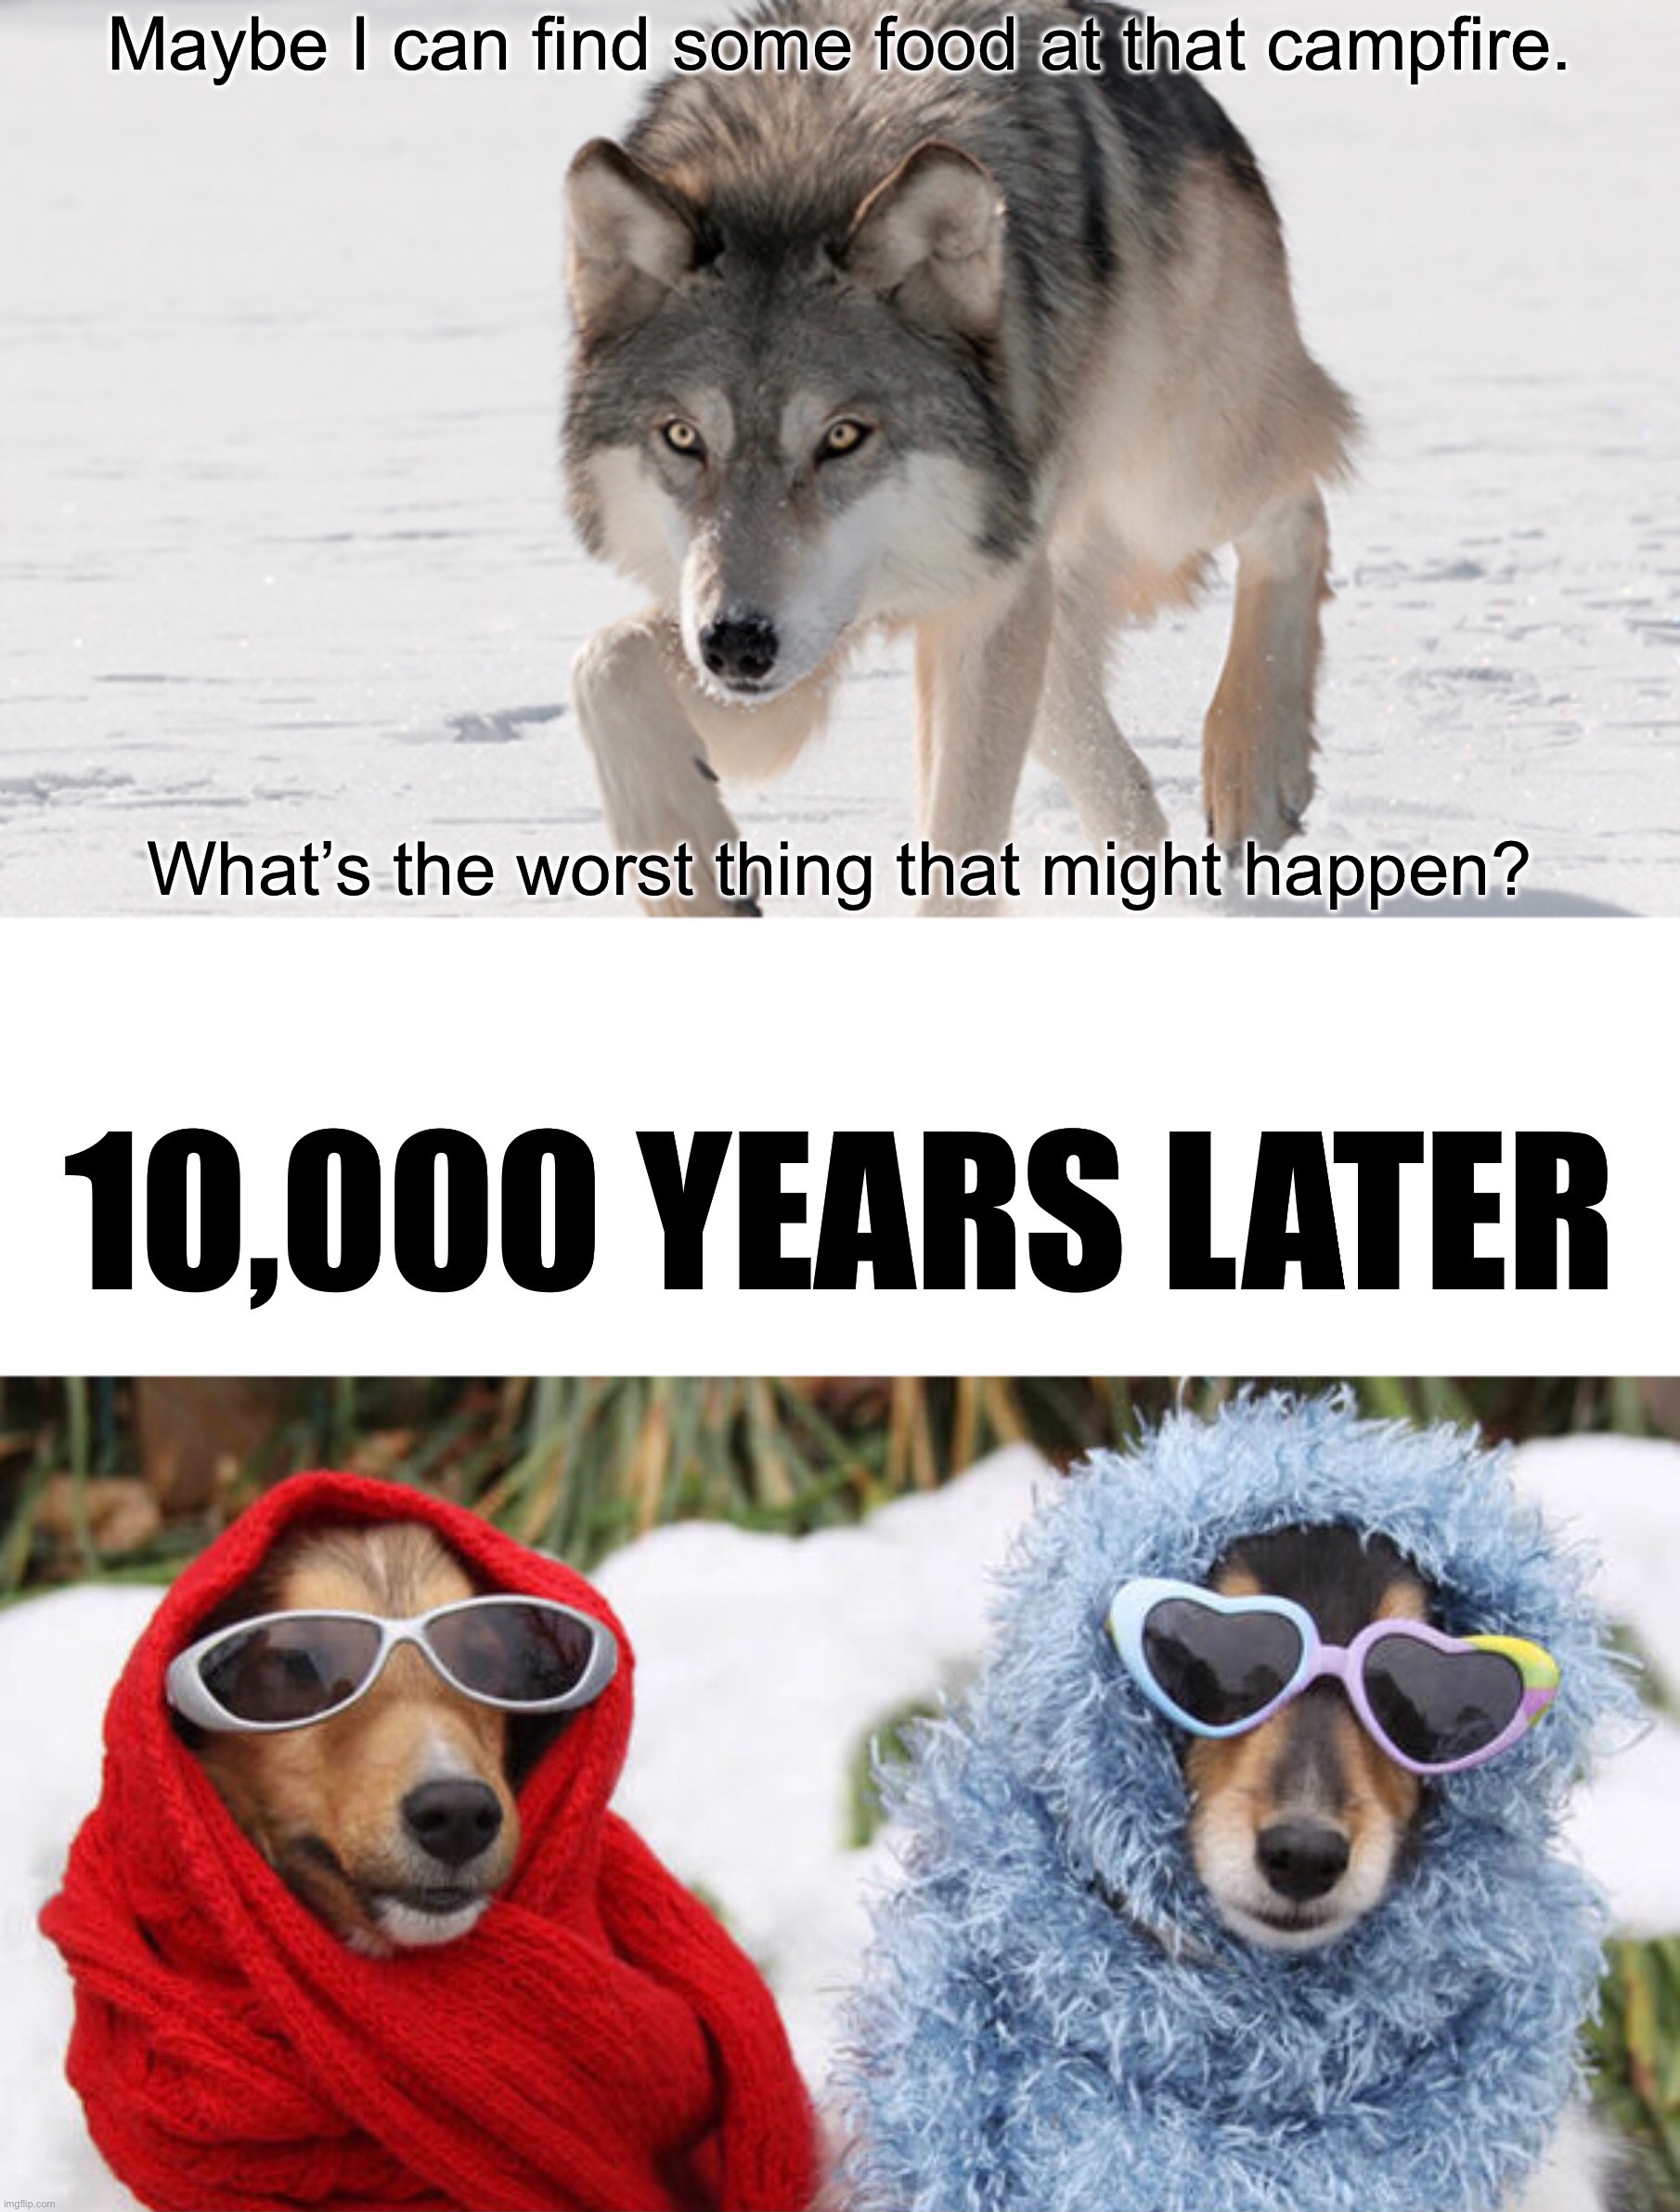 Maybe I can find some food at that campfire. What’s the worst thing that might happen? 10,000 YEARS LATER | image tagged in funny,memes,evolution,dogs,funny animals,dank memes | made w/ Imgflip meme maker